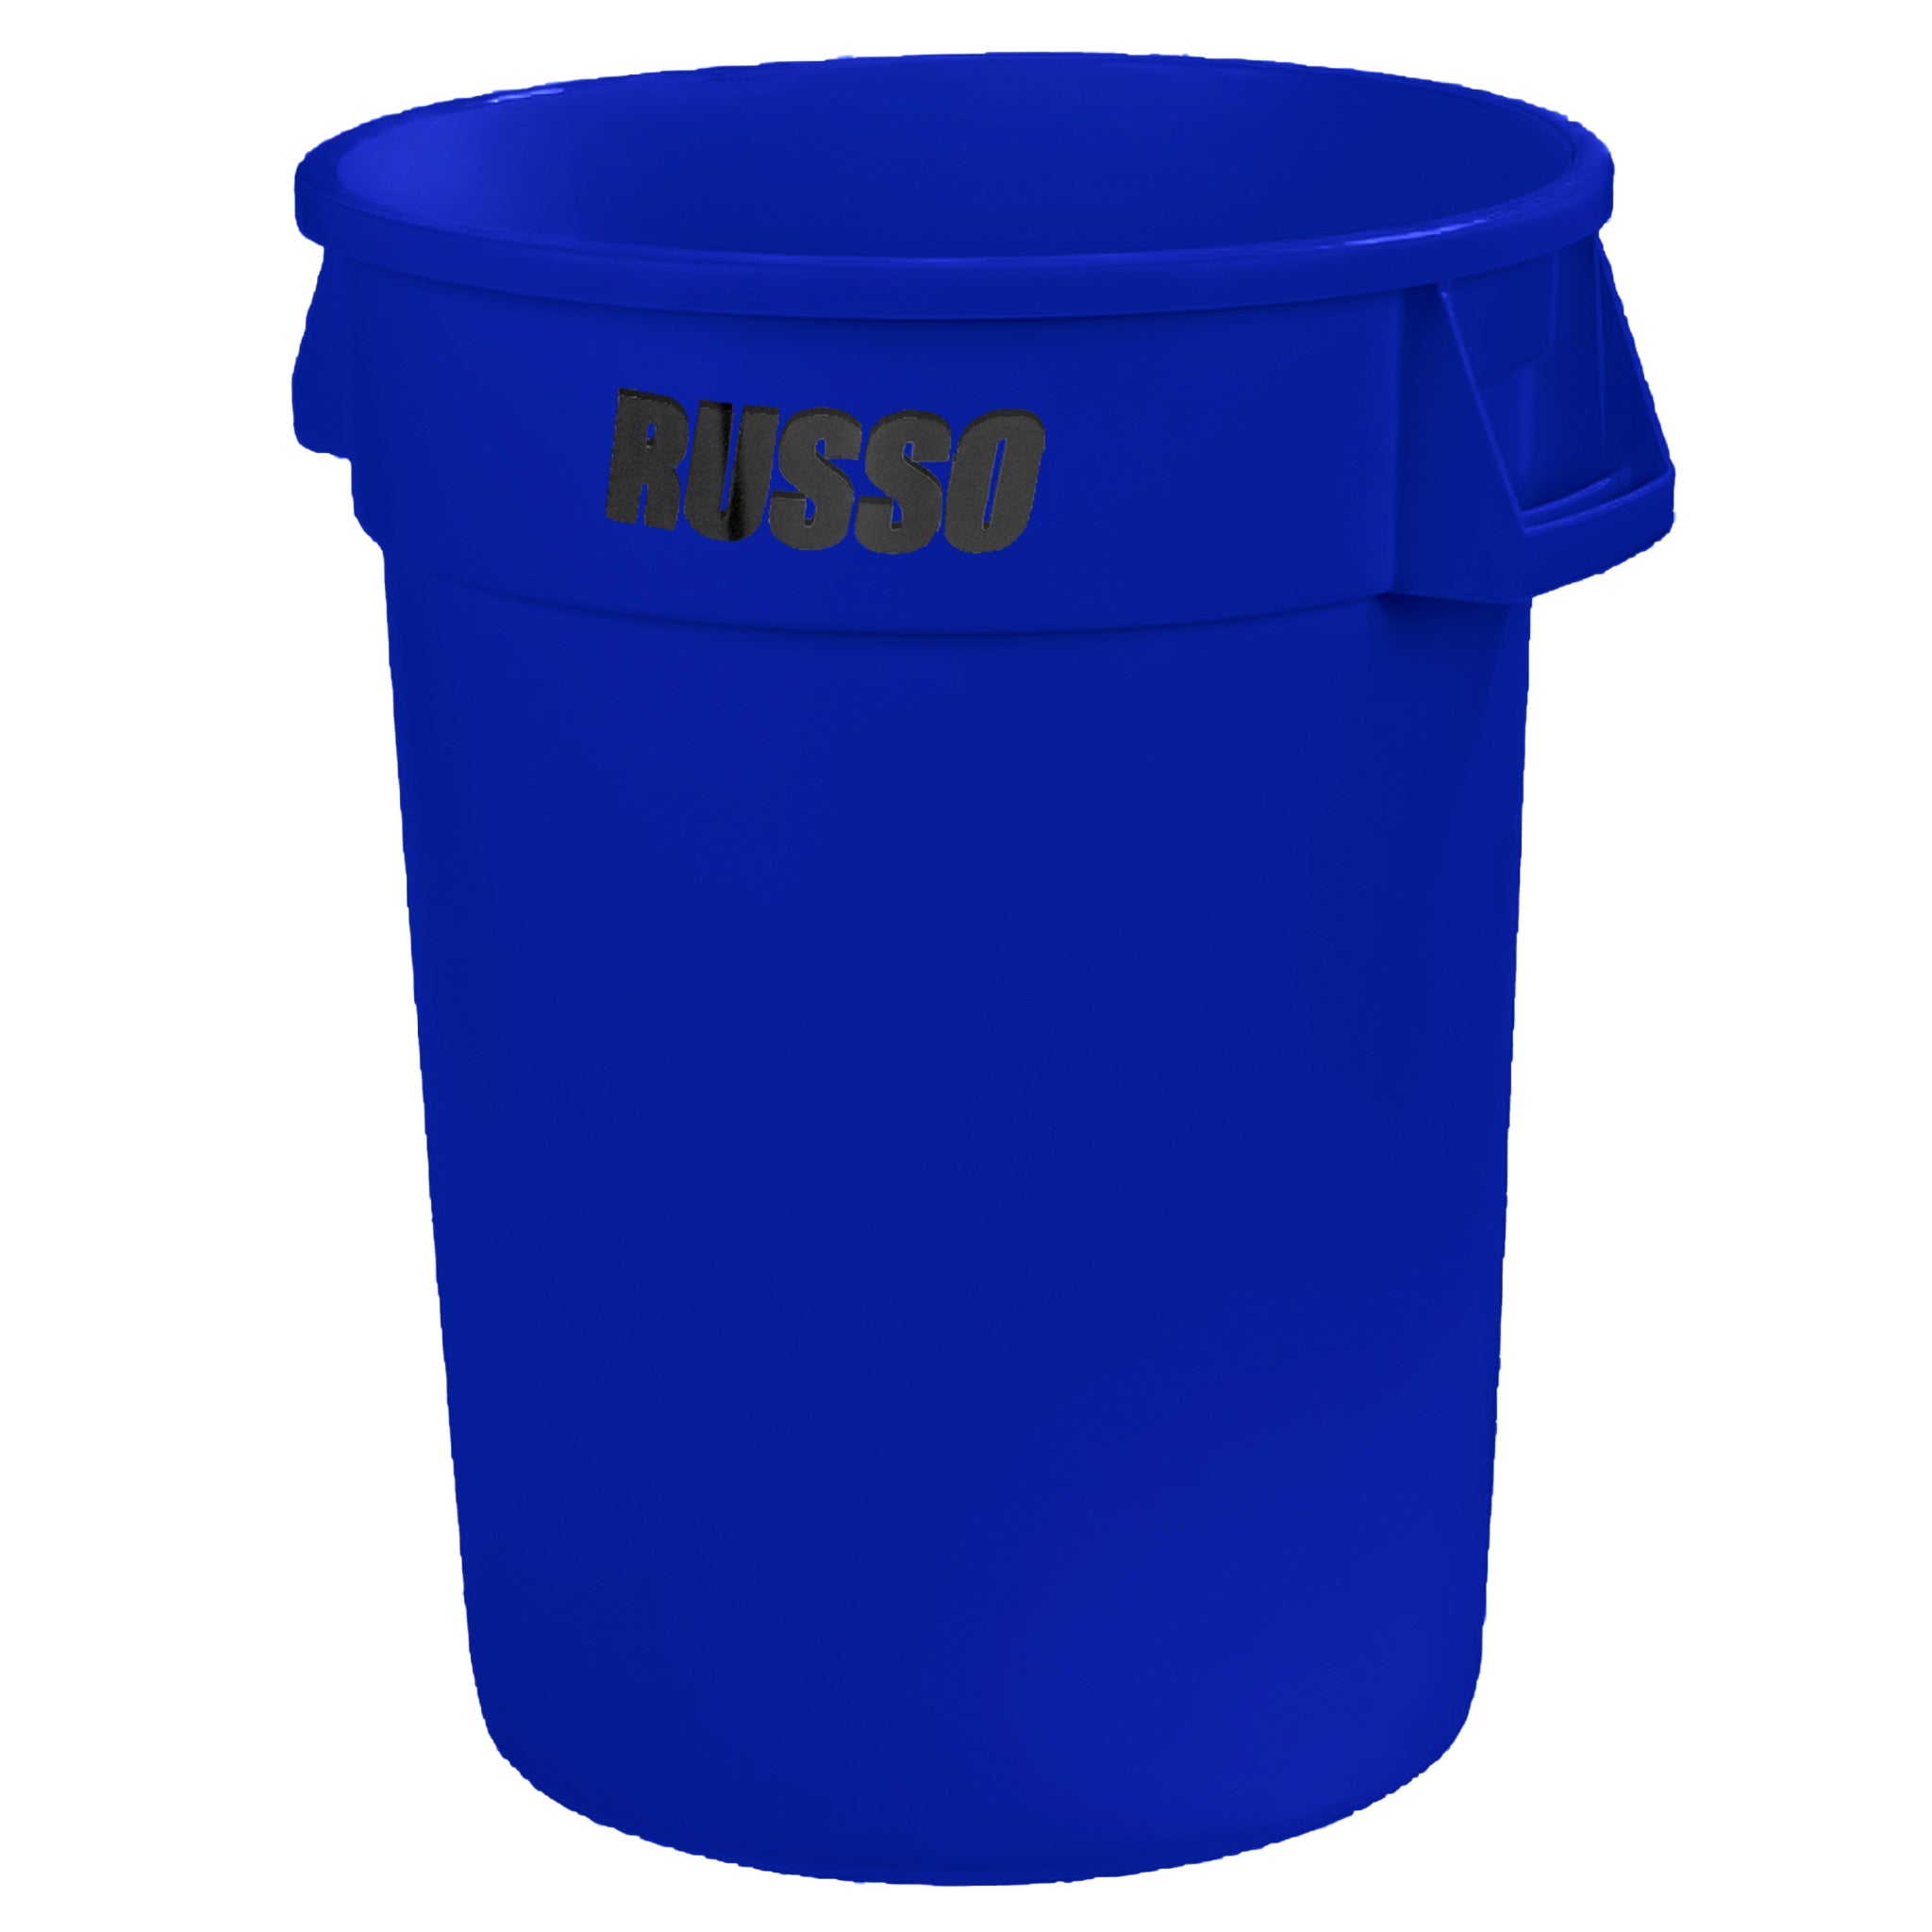 RUSSO Glow Can Container 32 Gallon - Blue